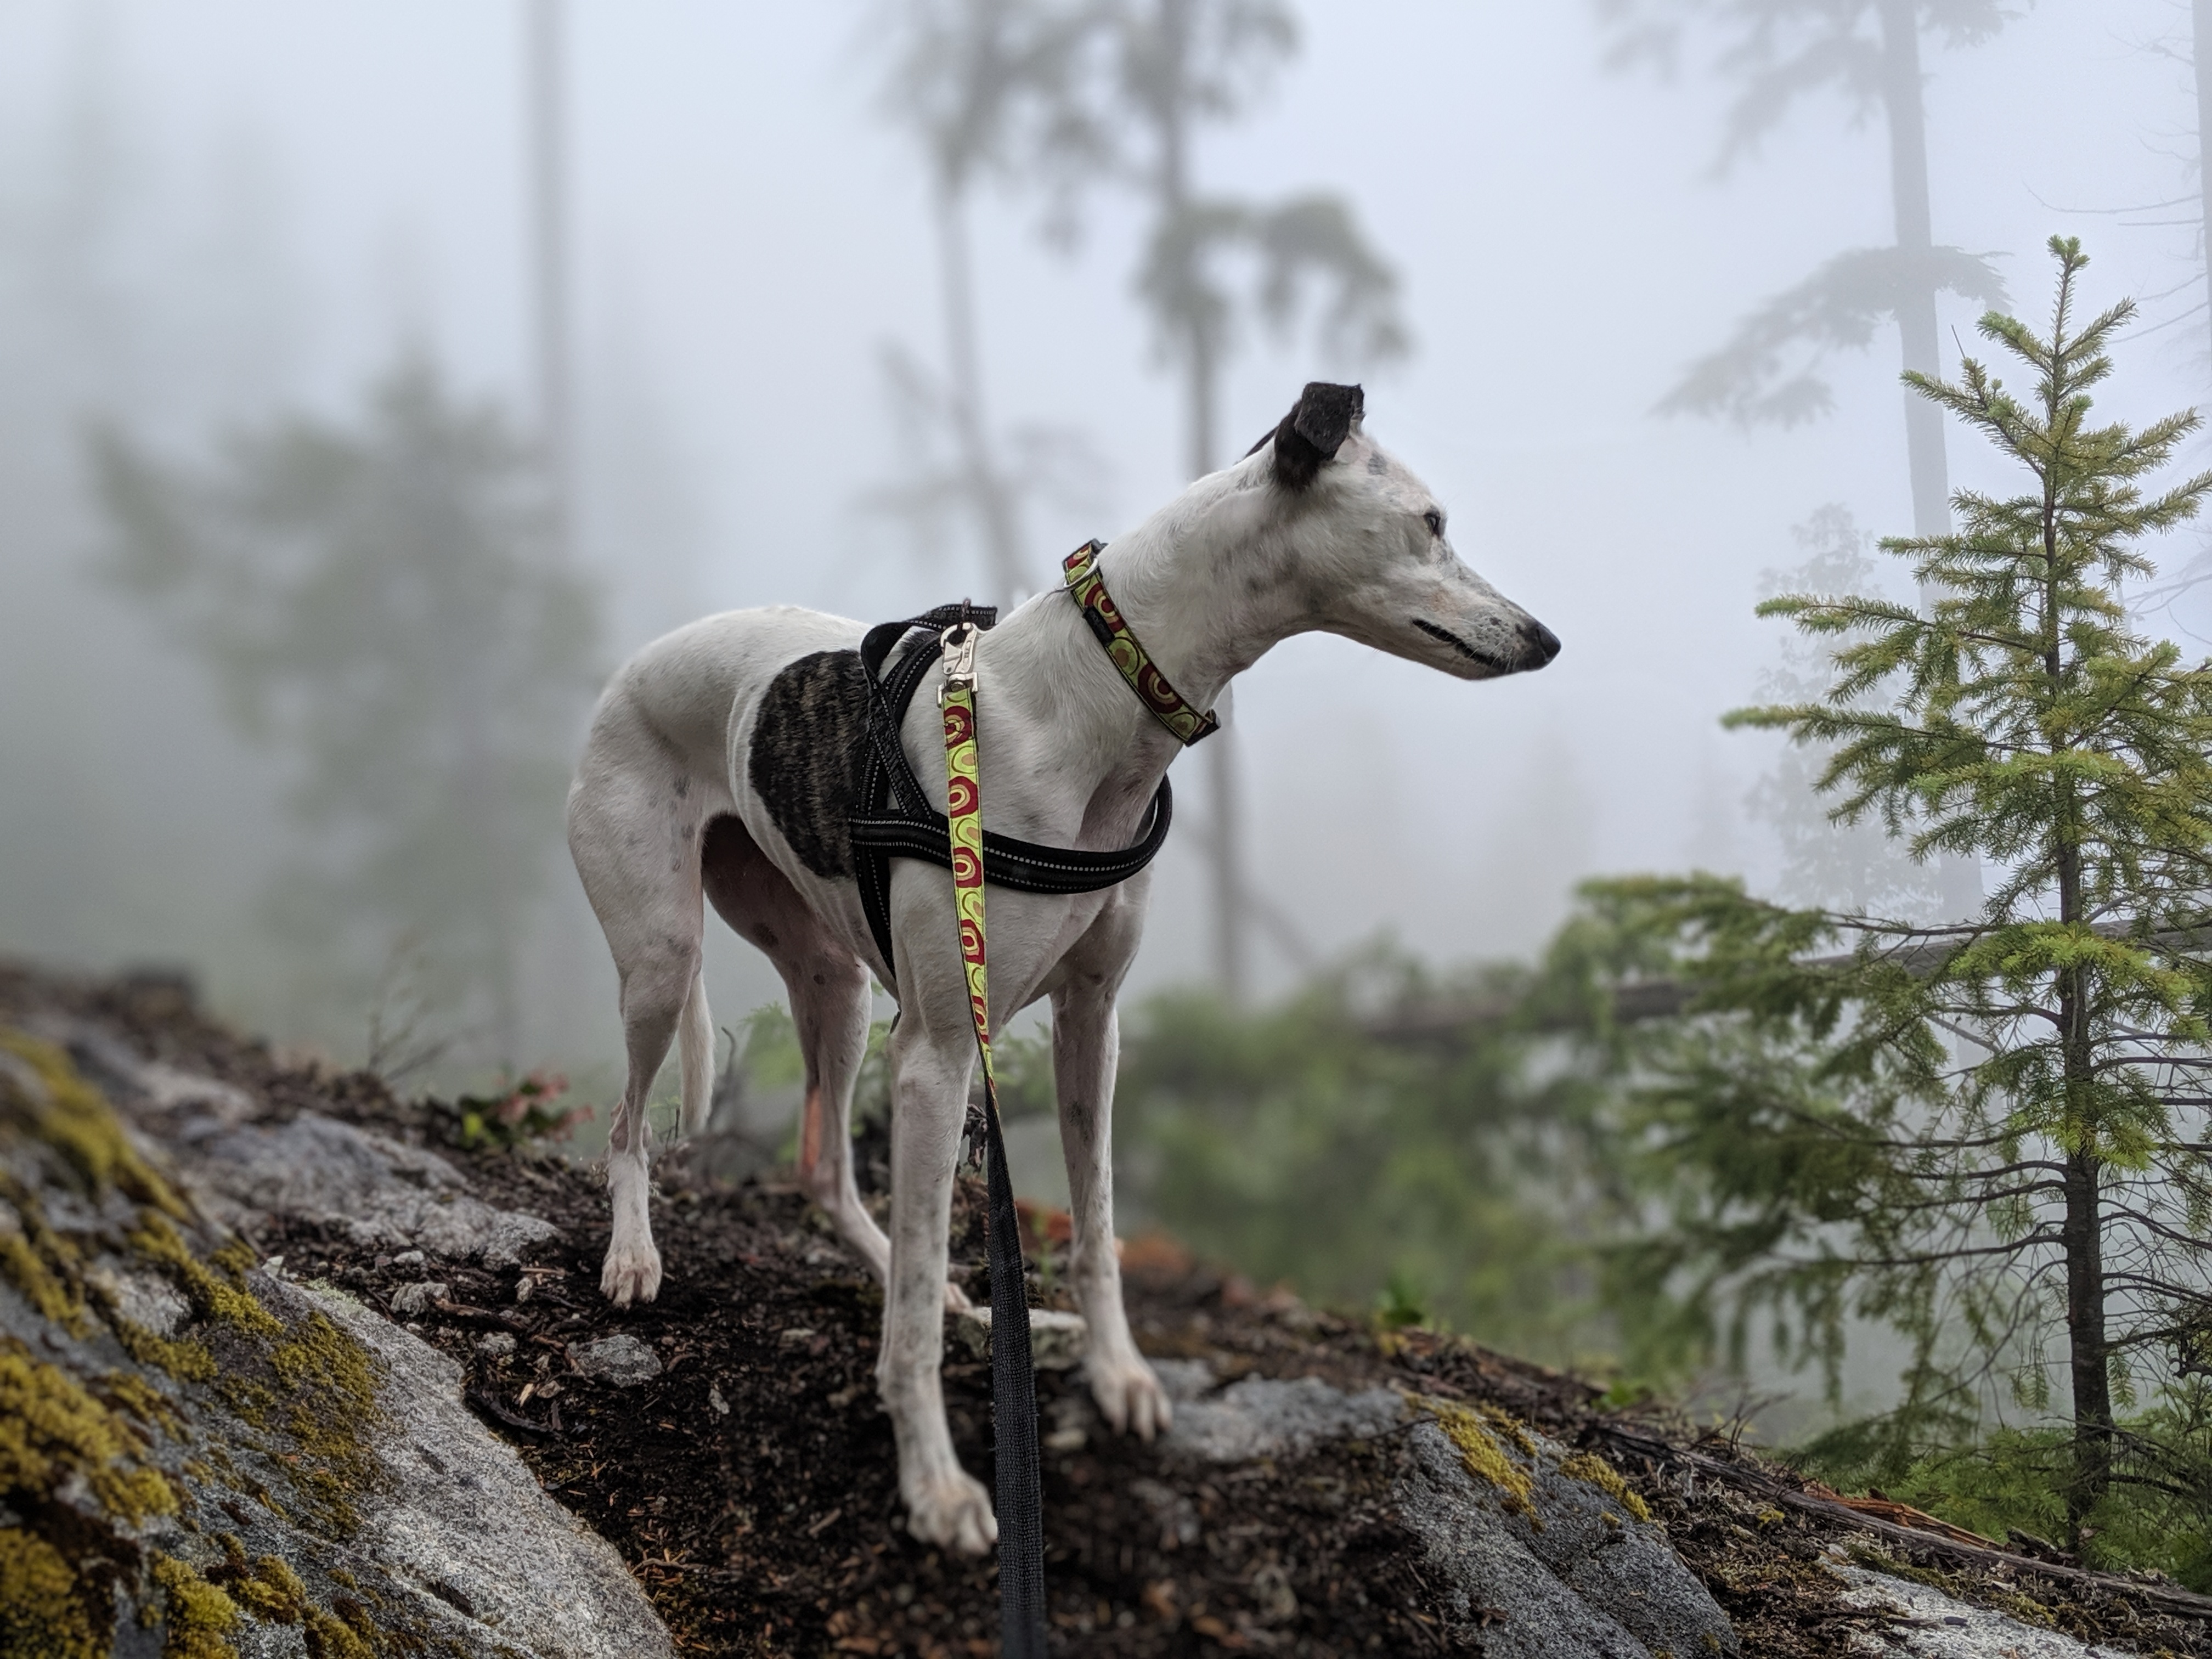 General 4032x3024 whippet hiking forest mist wilderness outdoors hounds